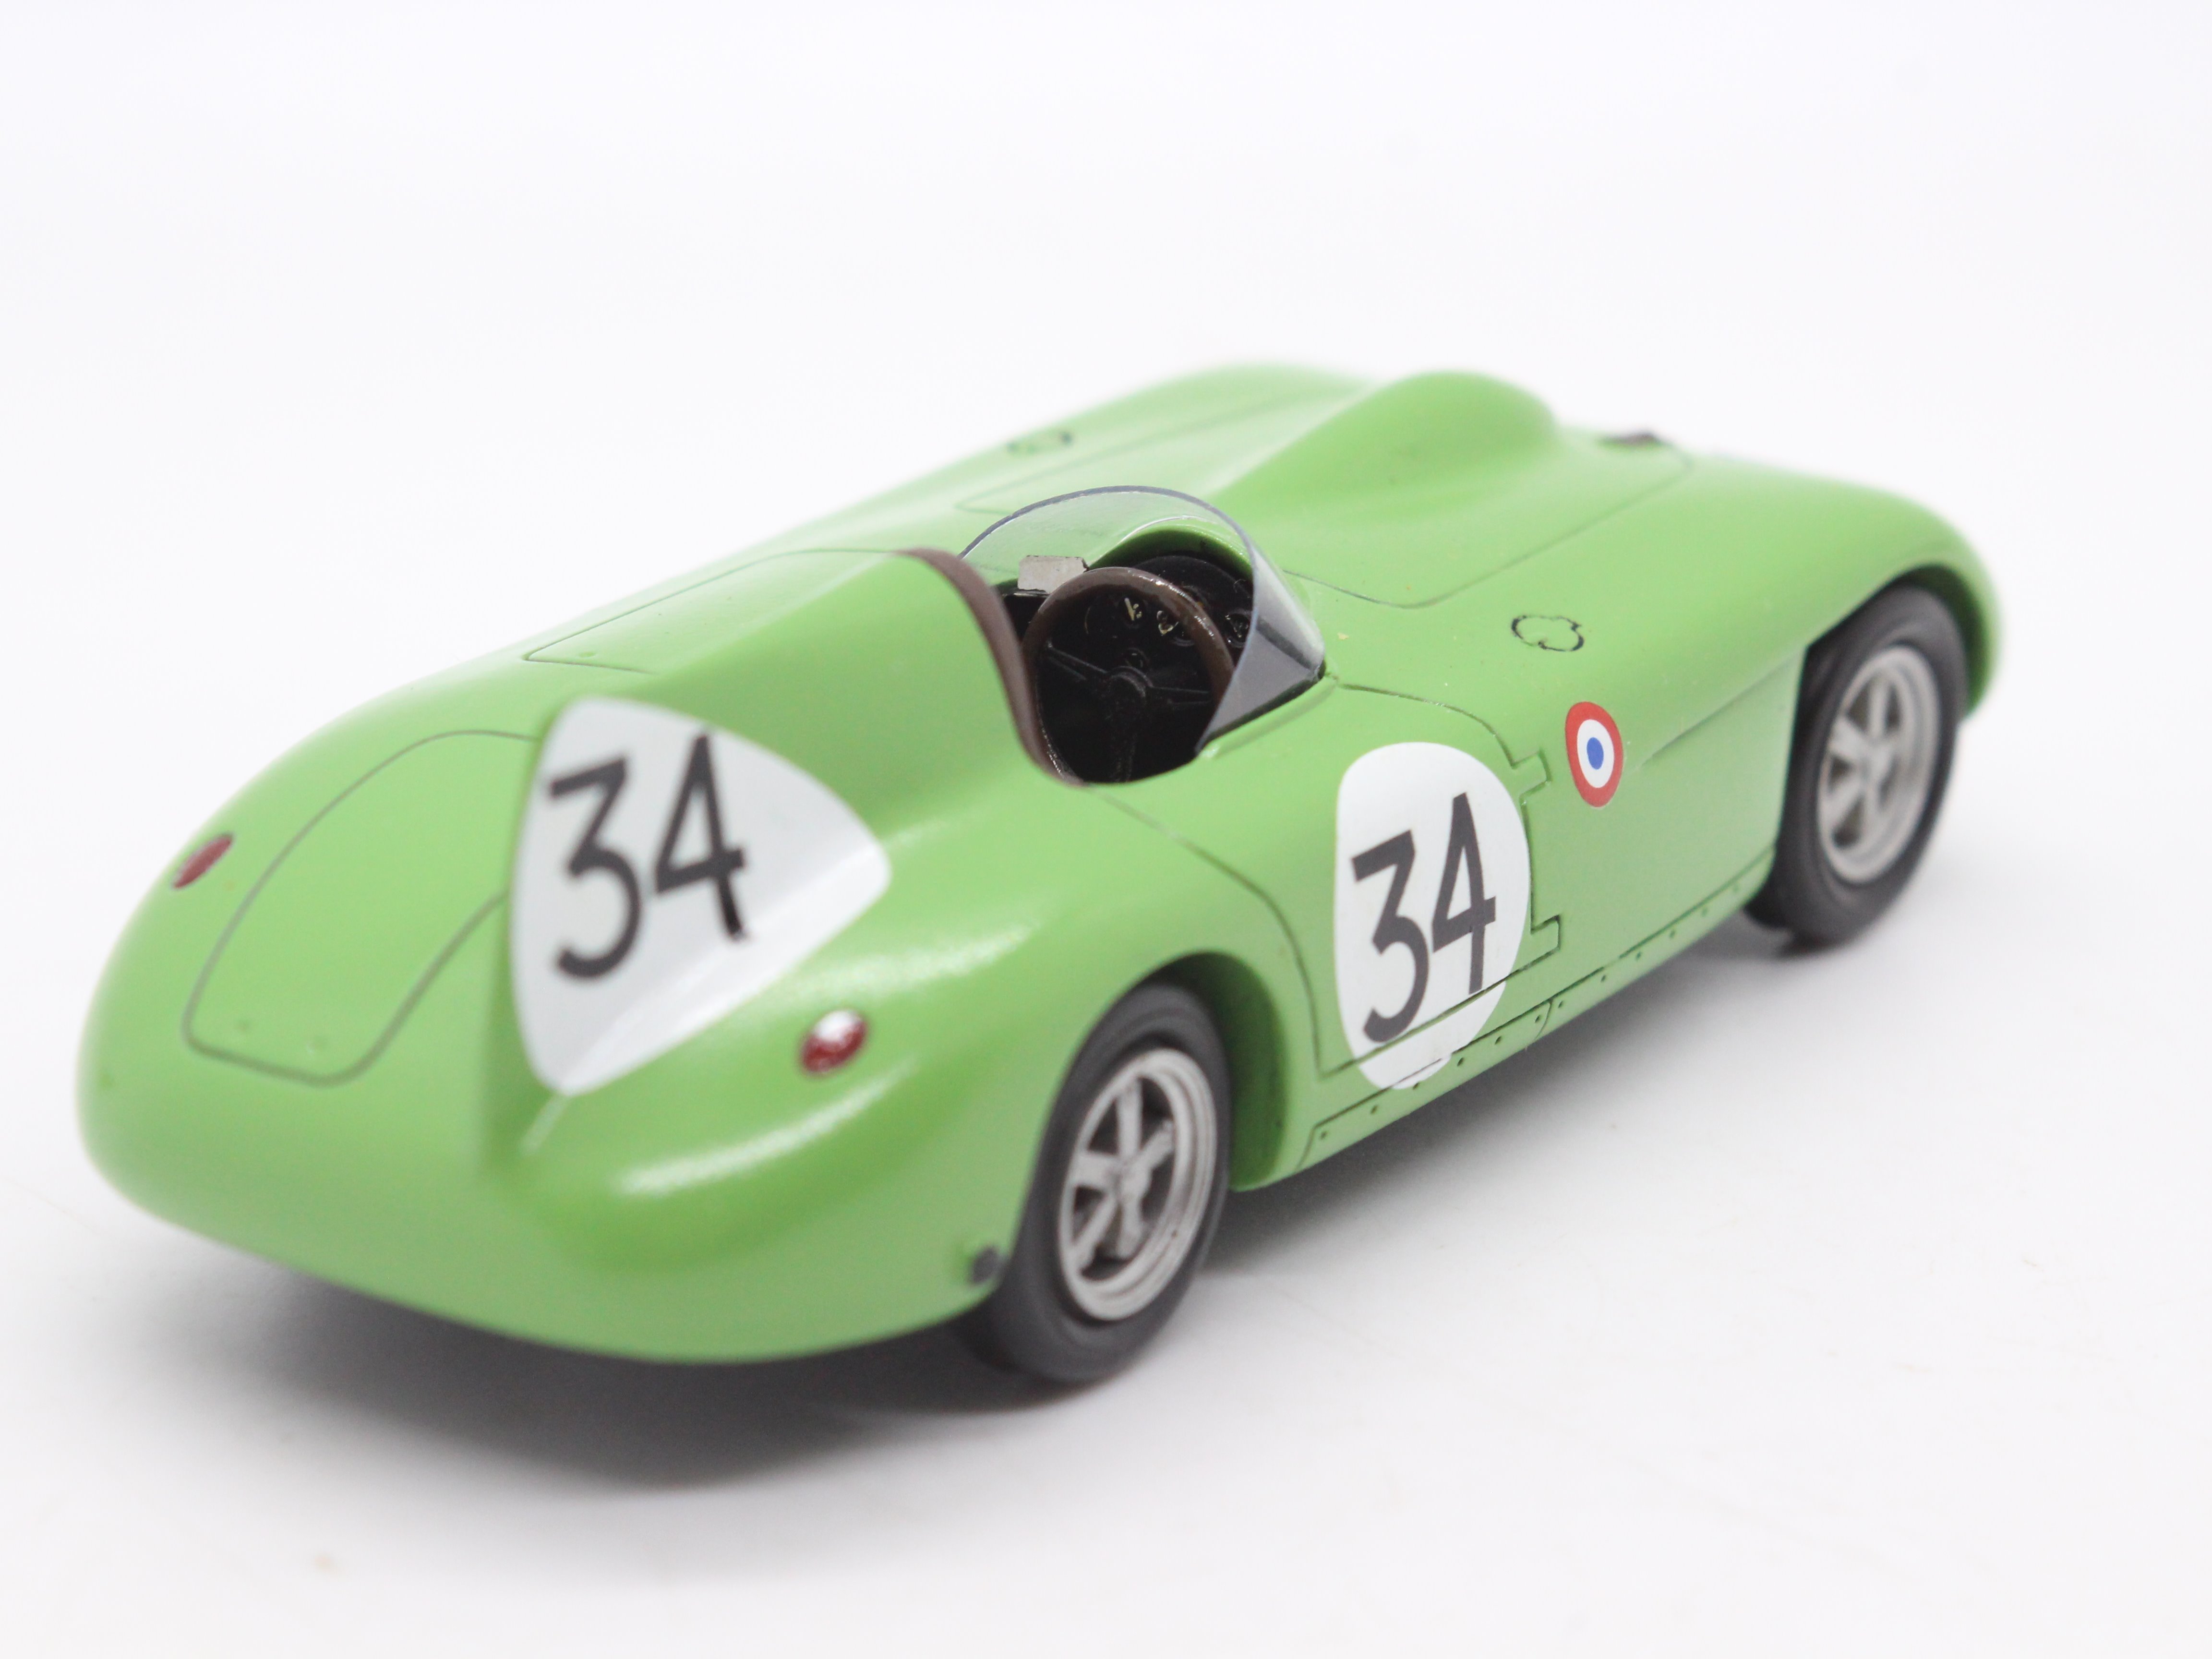 Provence Moulage - MPH Models - # 286 - A boxed 1:43 scale resin model Bristol 450C 1955 Le Mans - Image 6 of 12